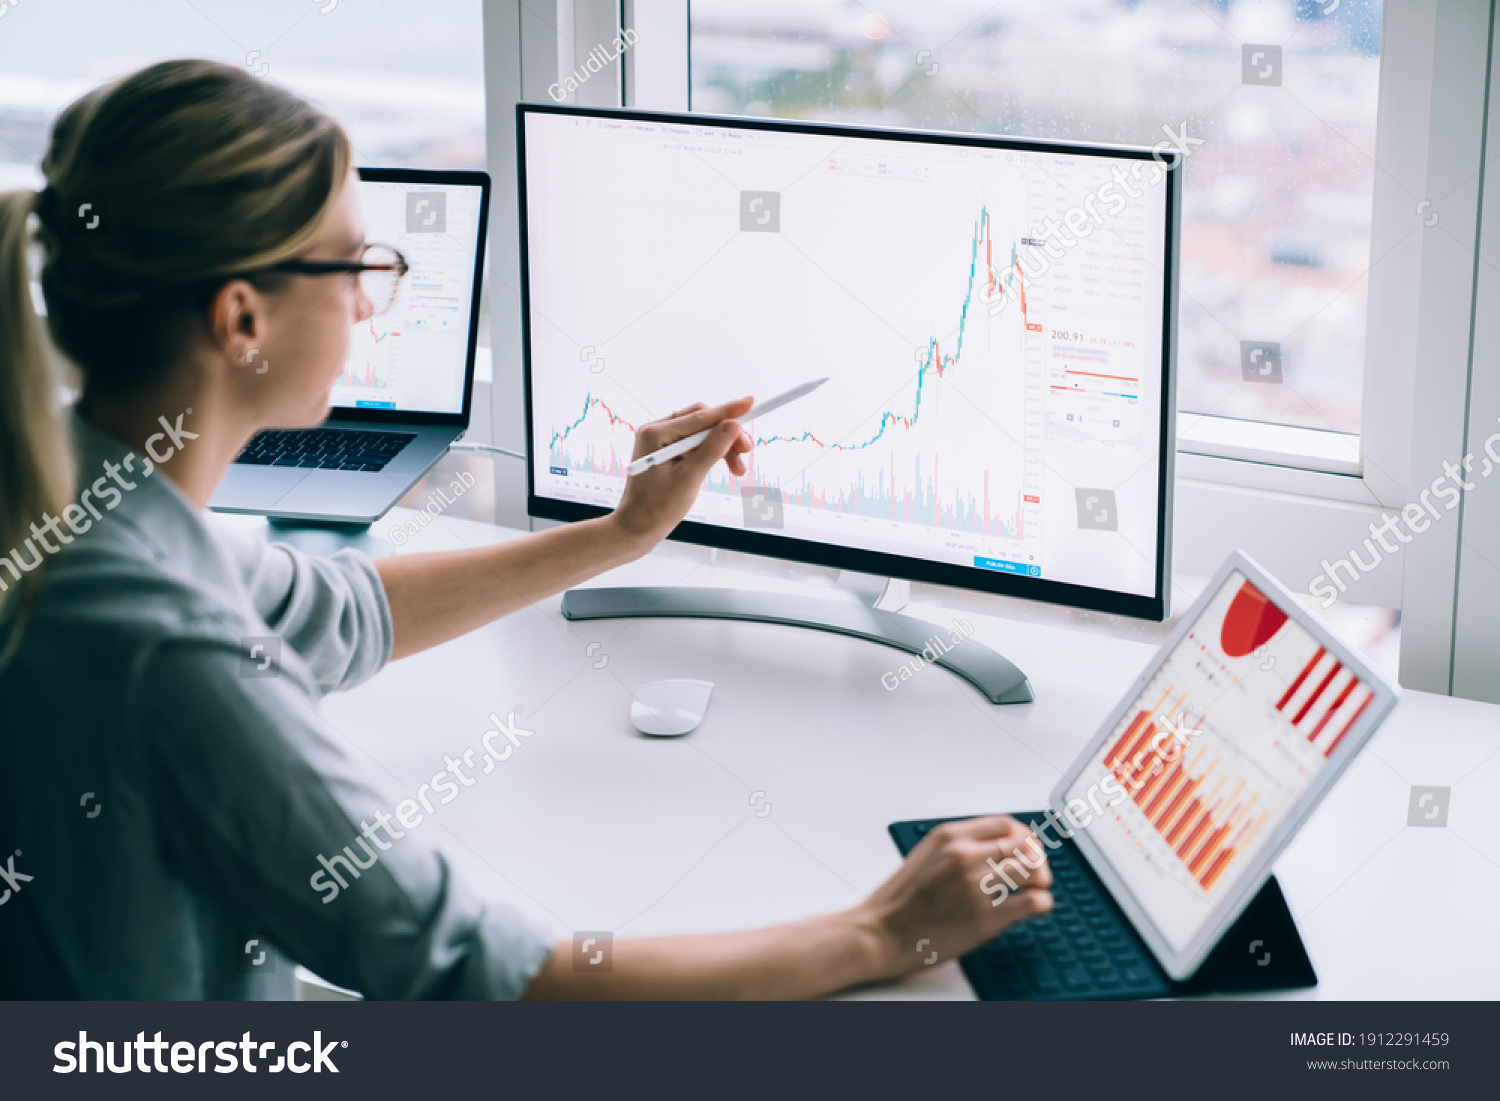 Side view of anonymous young female analyst pointing with stylus at desktop computer while studying chart near tablet at work #1912291459